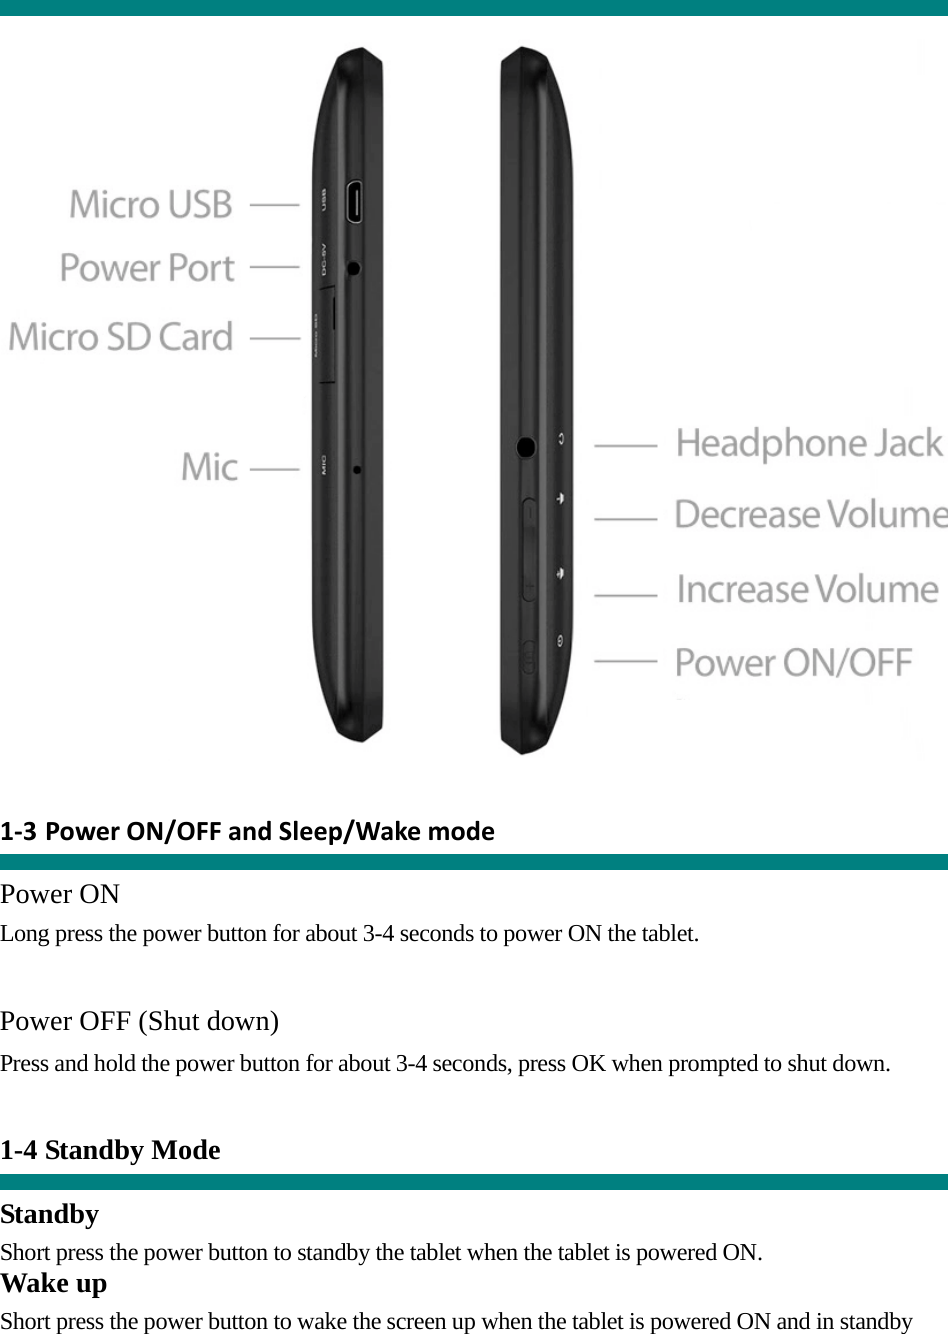          1‐3 PowerON/OFFandSleep/Wakemode  Power ON Long press the power button for about 3-4 seconds to power ON the tablet.     Power OFF (Shut down)  Press and hold the power button for about 3-4 seconds, press OK when prompted to shut down.   1-4 Standby Mode   Standby Short press the power button to standby the tablet when the tablet is powered ON. Wake up Short press the power button to wake the screen up when the tablet is powered ON and in standby 